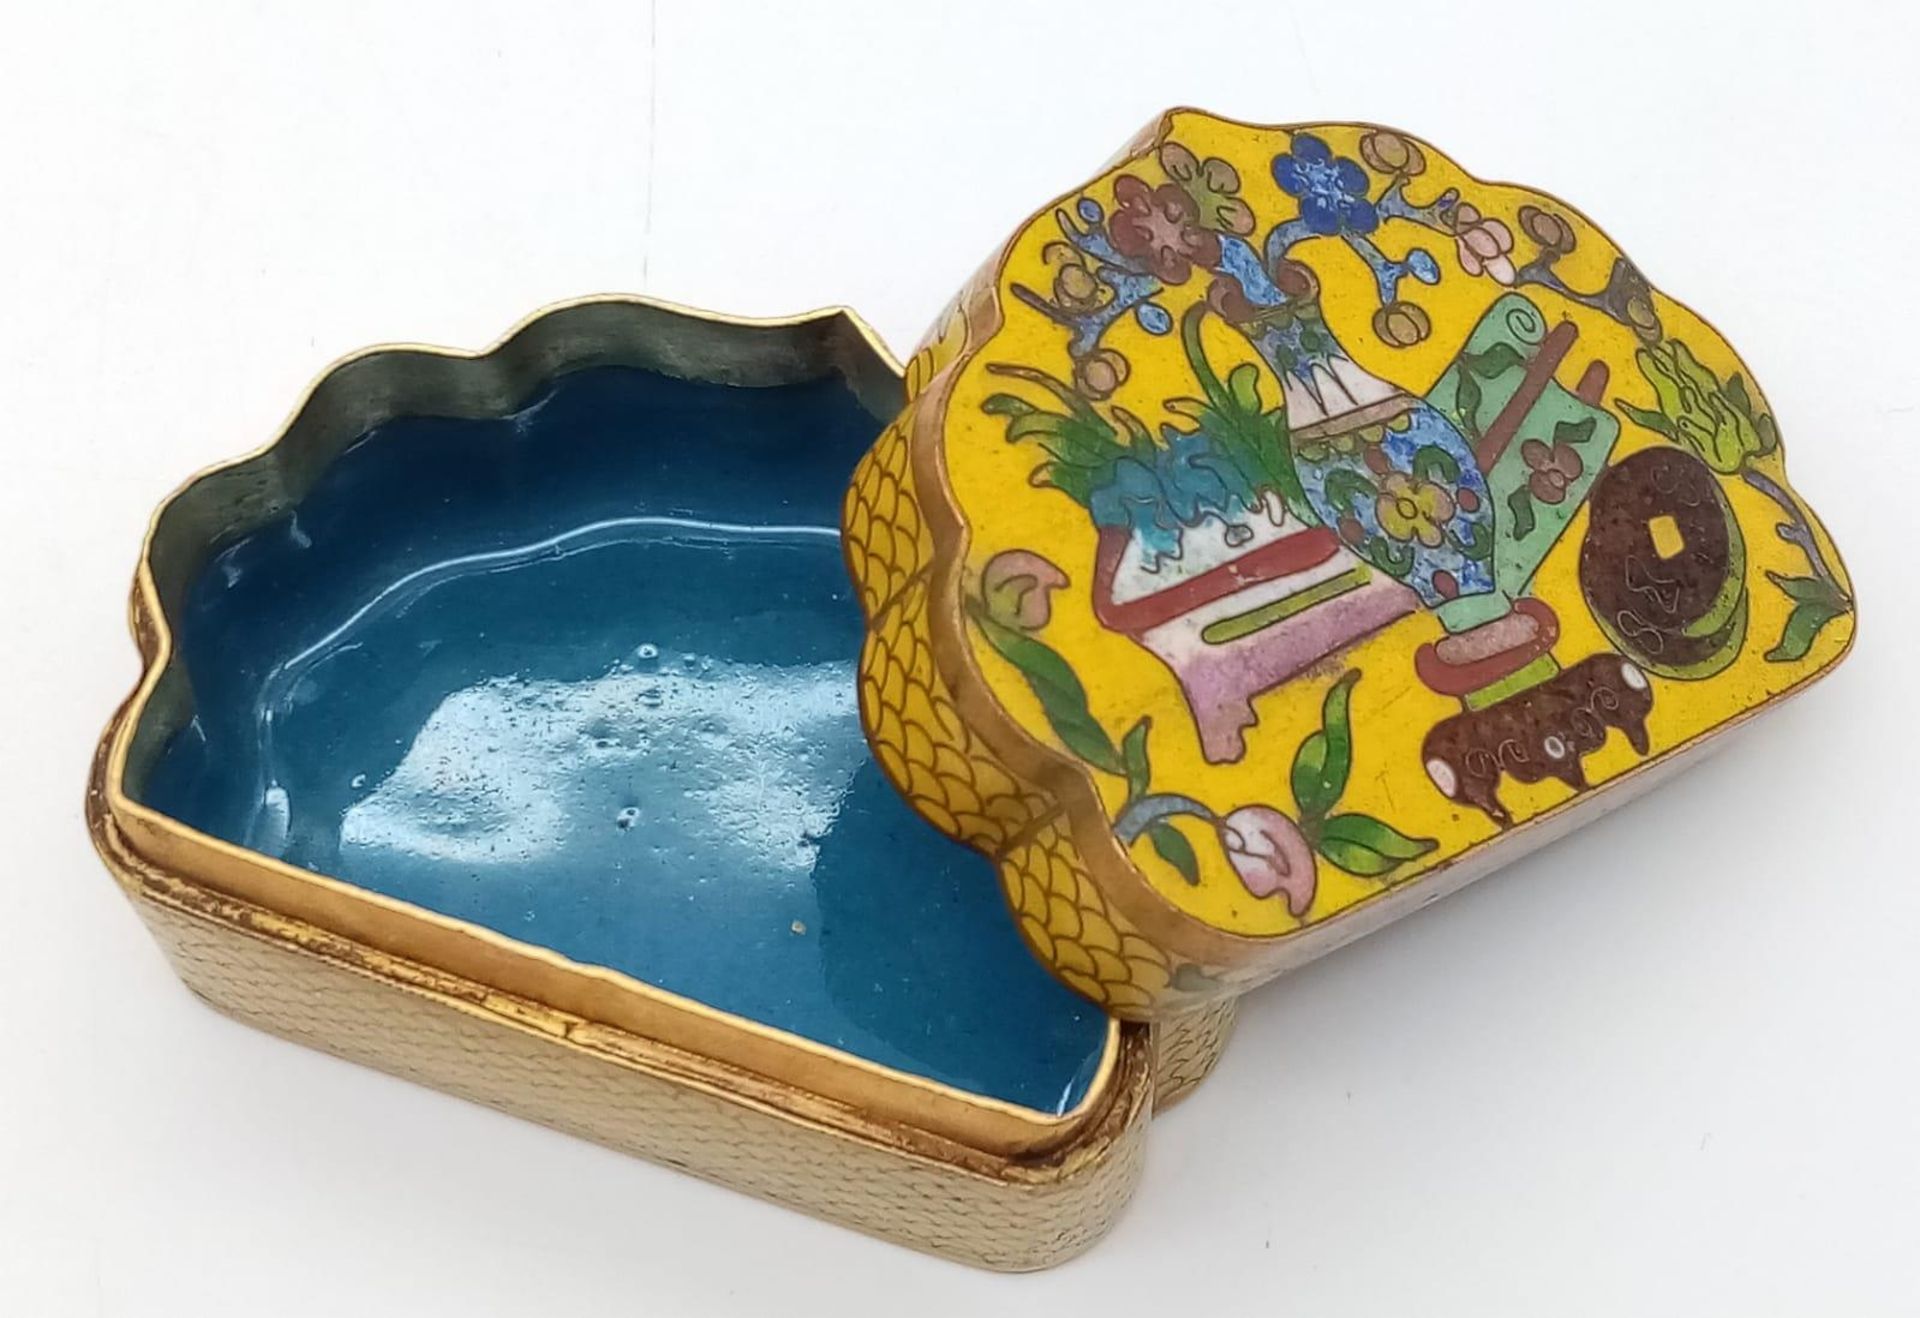 AN EXQUISITE EXAMPLE OF 19TH CENTURY CHINESE CLOISONNE WORK IN THE FORM OF A SMALL TRINKET BOX . - Image 5 of 5